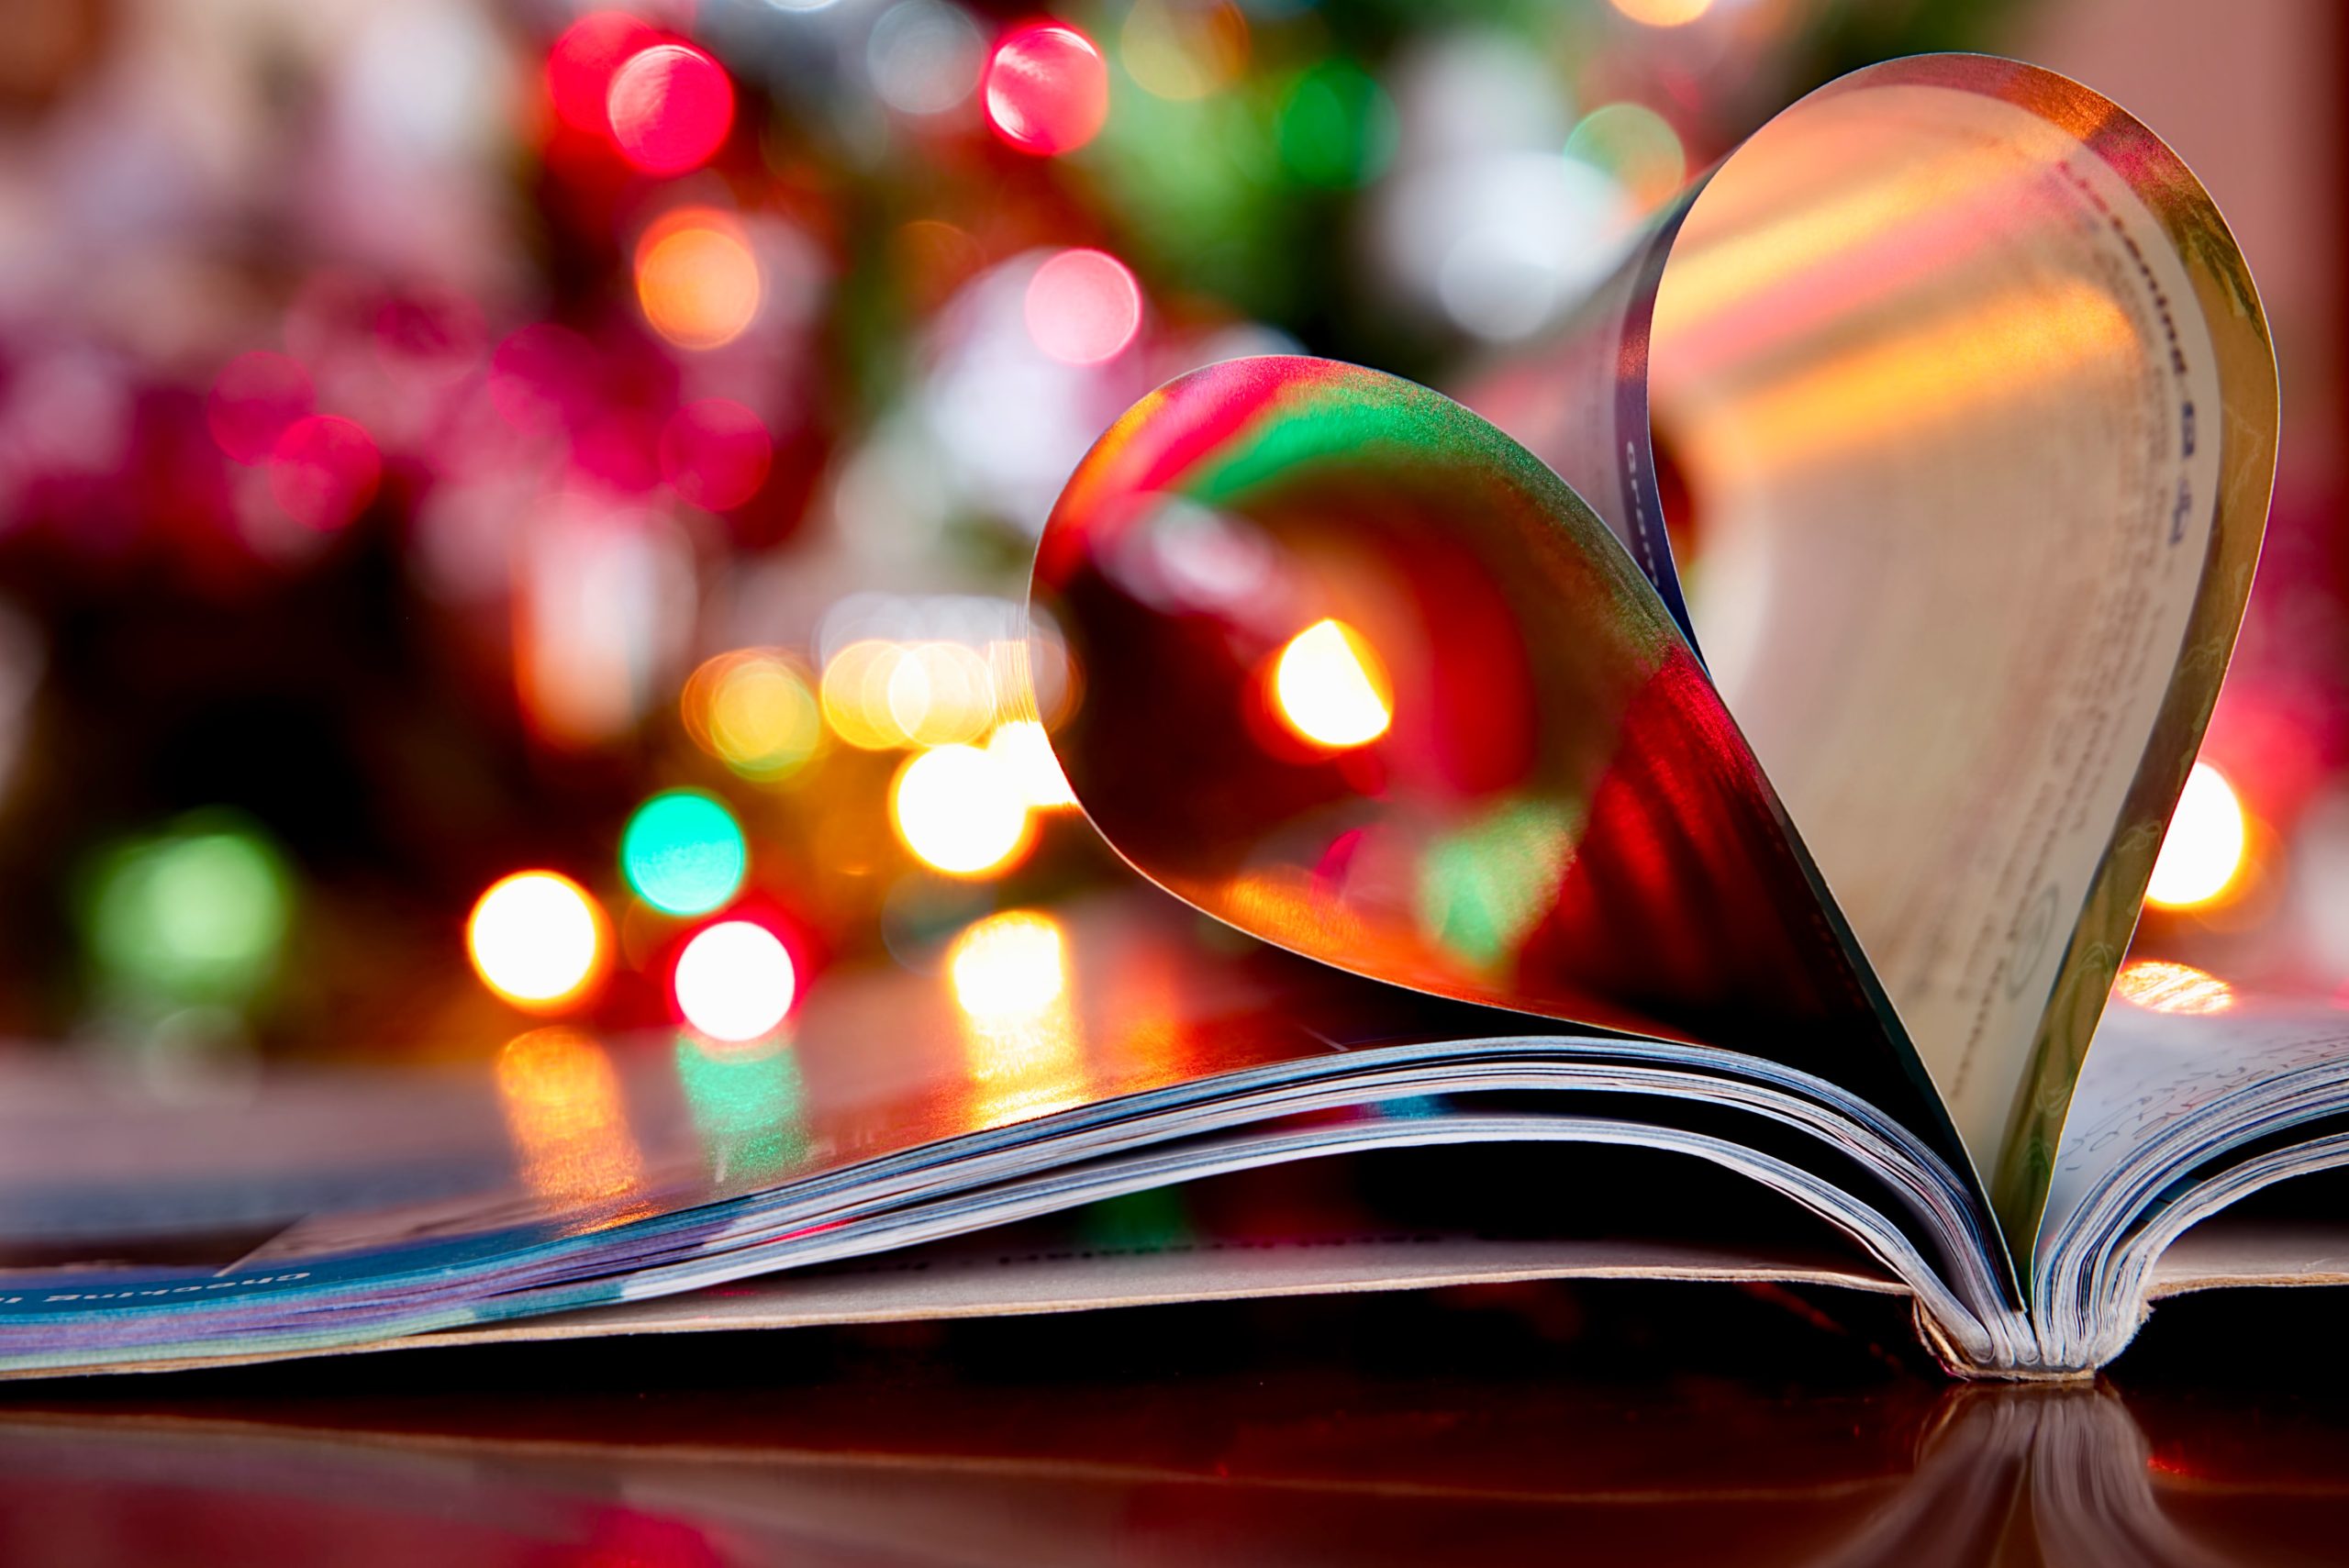 Stocking fillers: 8 of the best car books we’ll be reading this Christmas